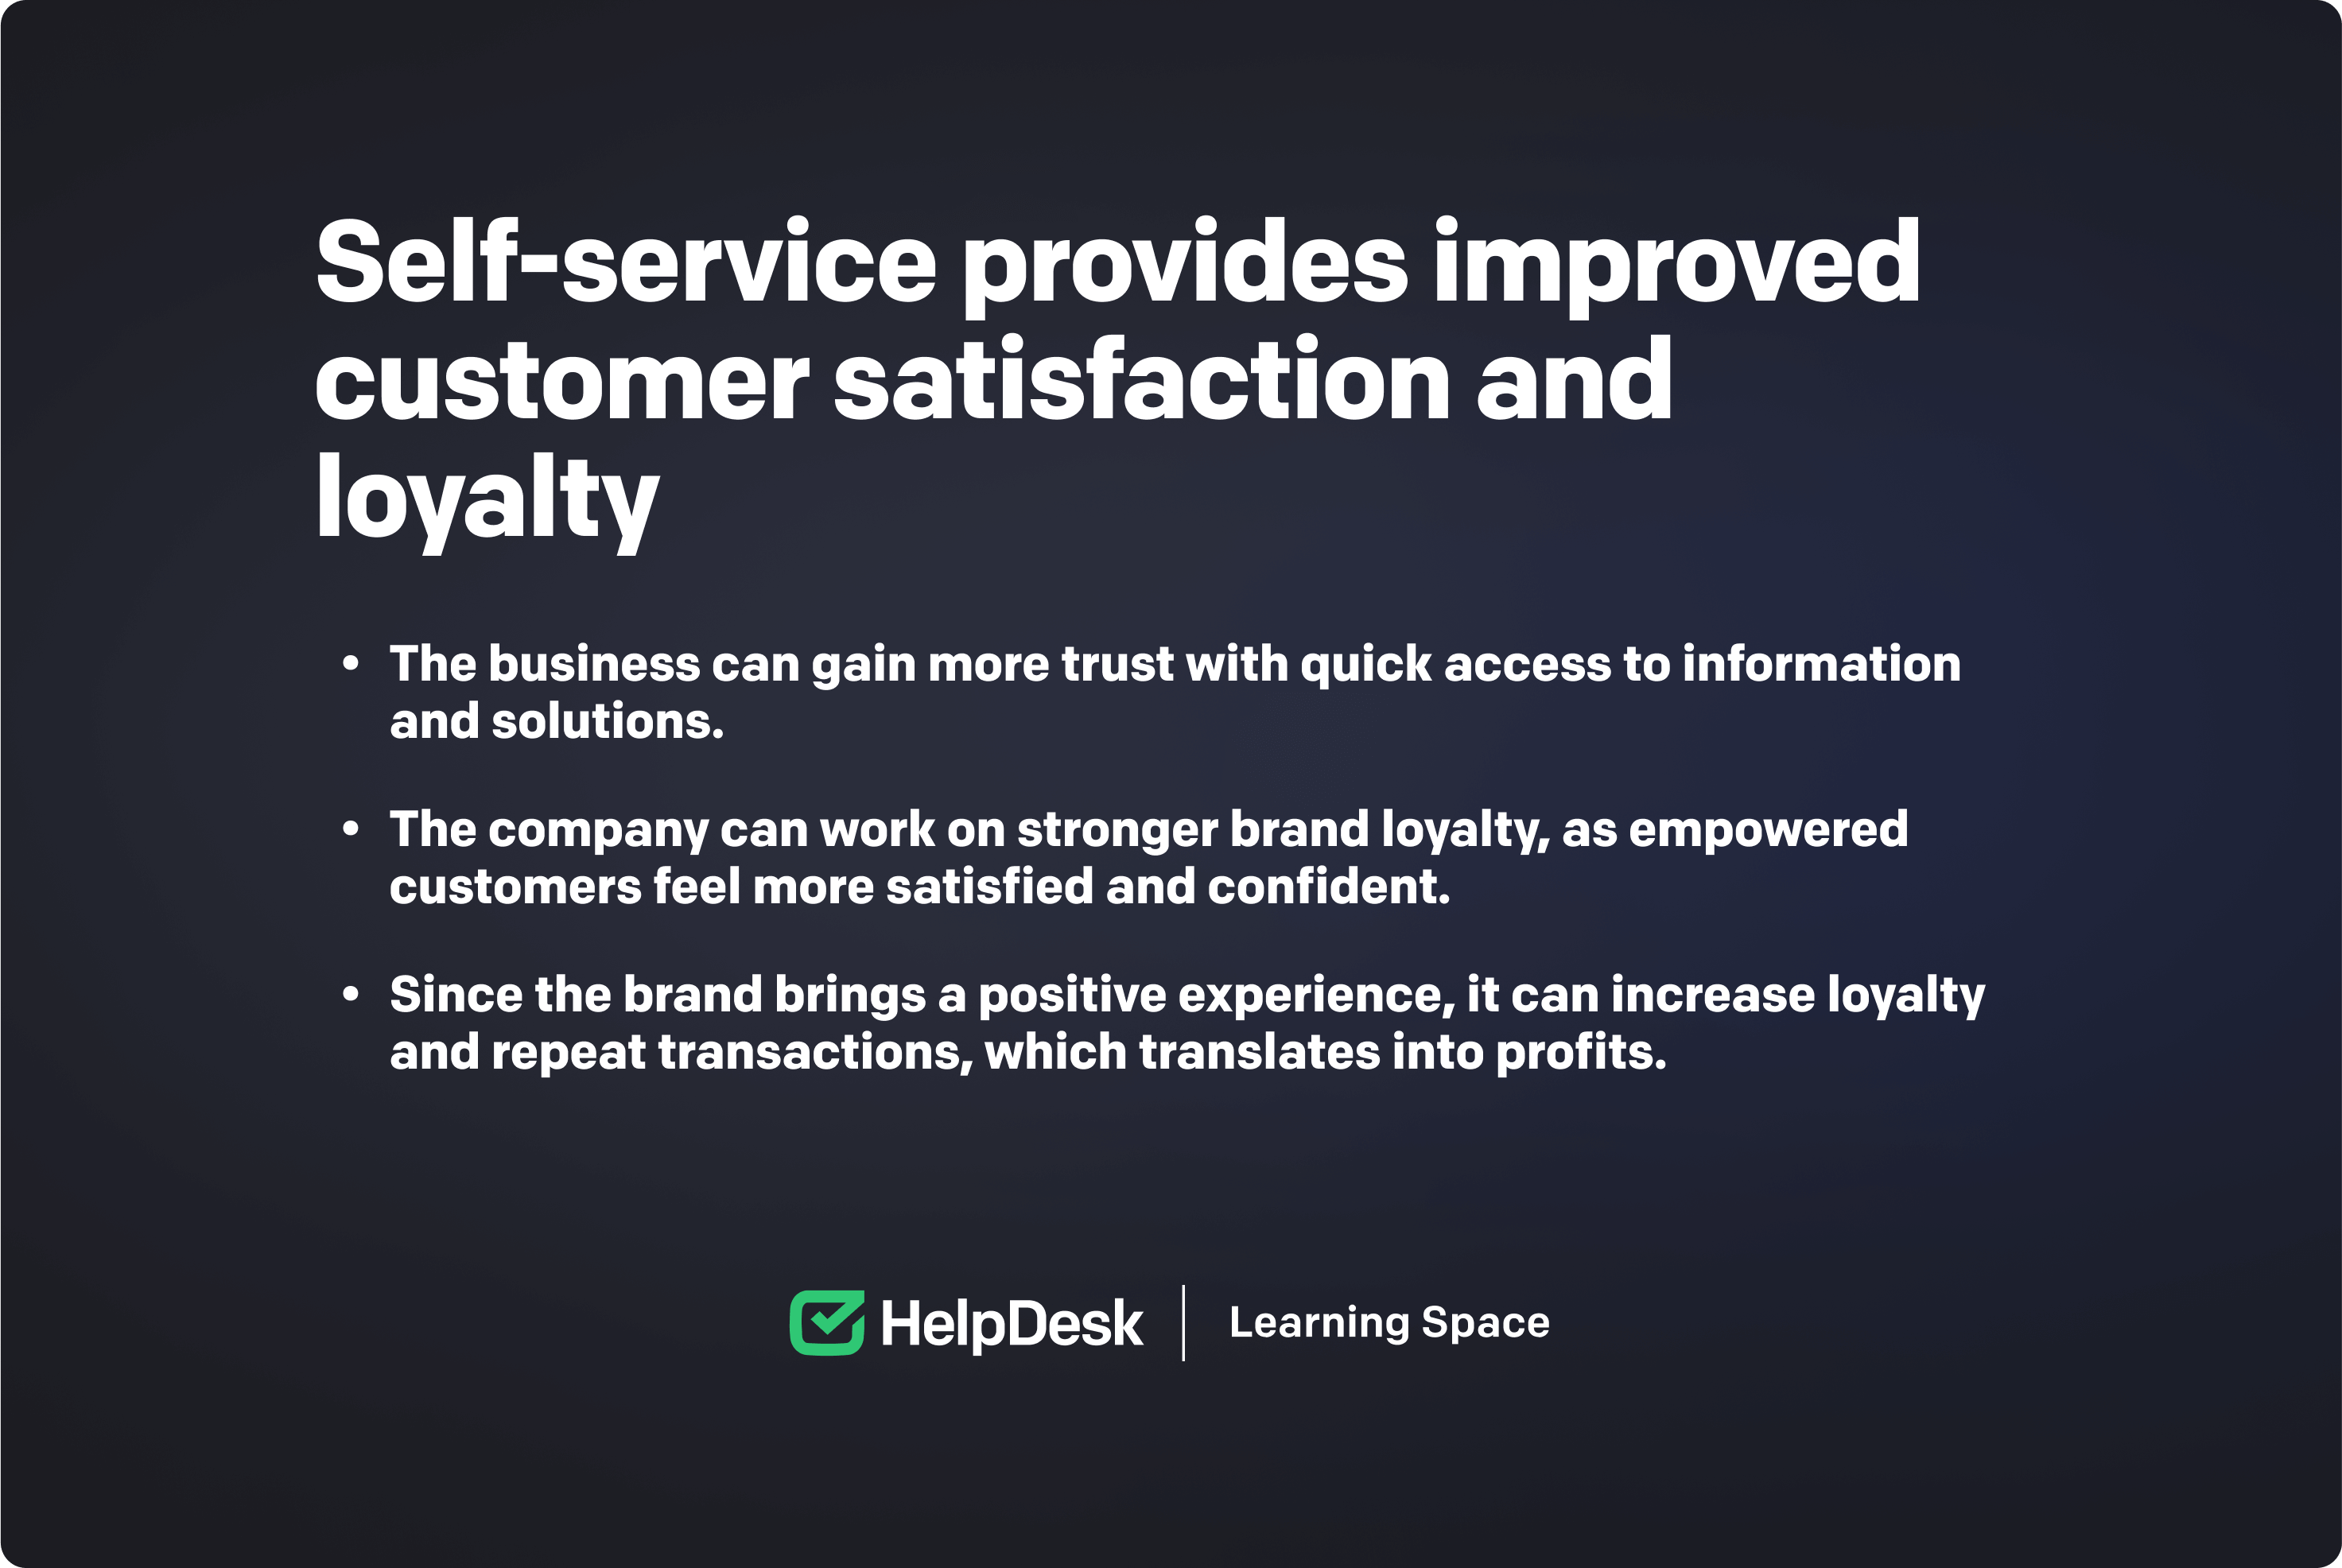 Self-service benefits for support teams: improved customer satisfaction and loyalty